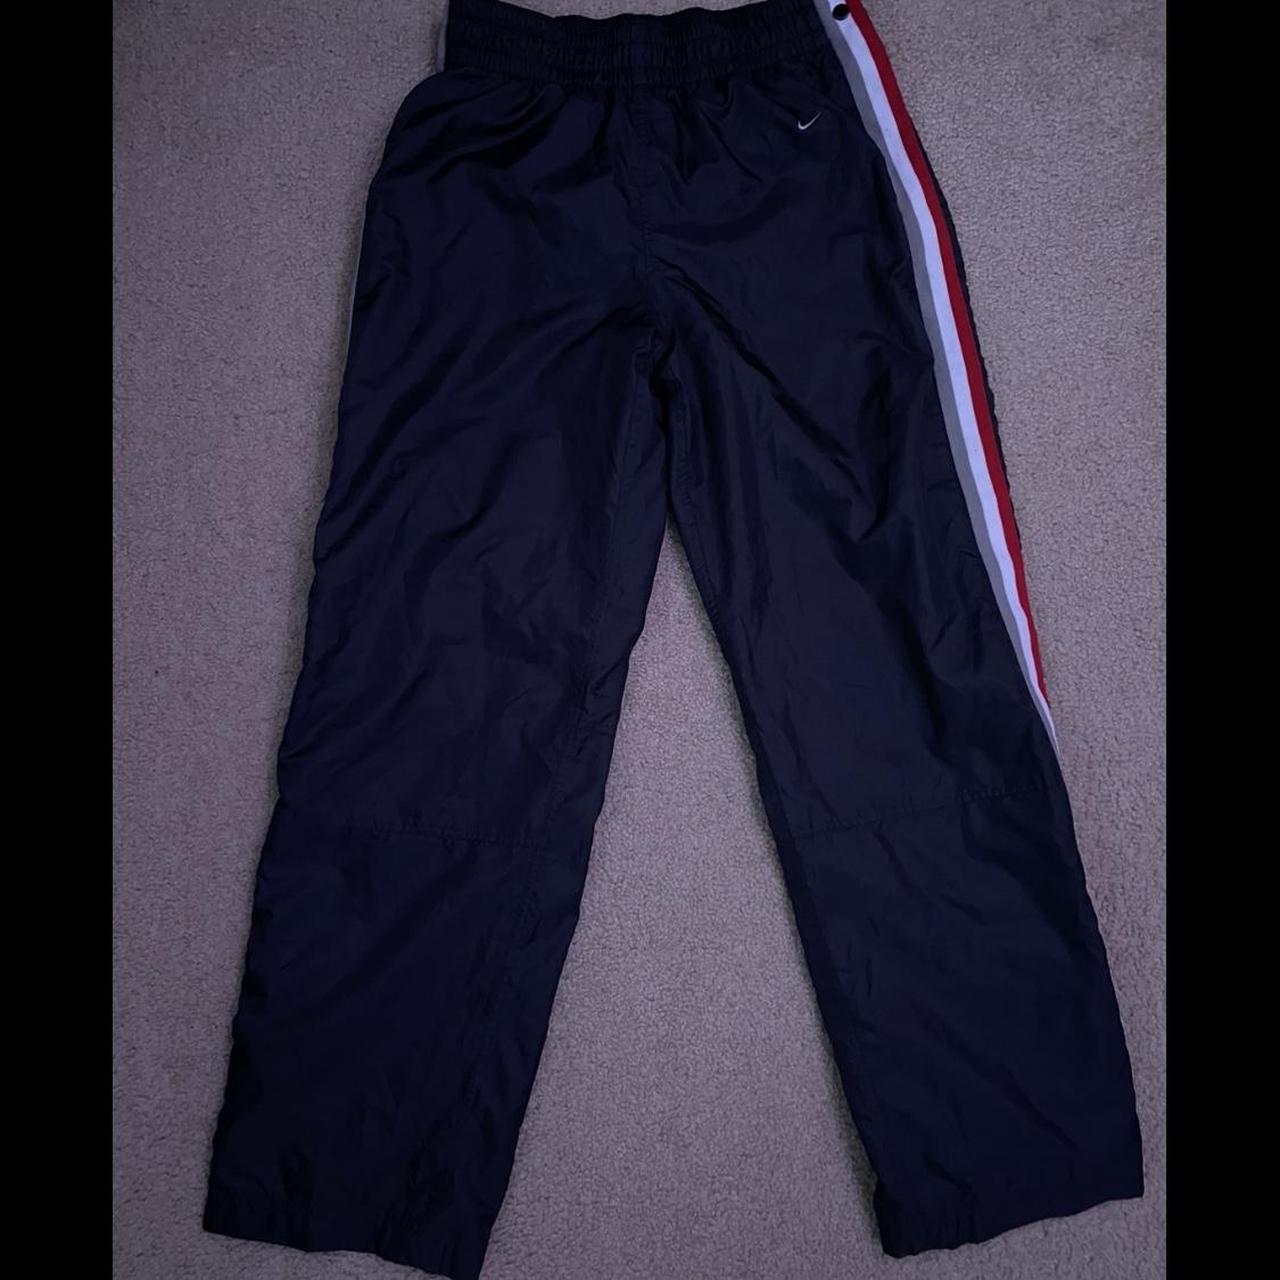 Nike button up track pants Perfect condition no... - Depop